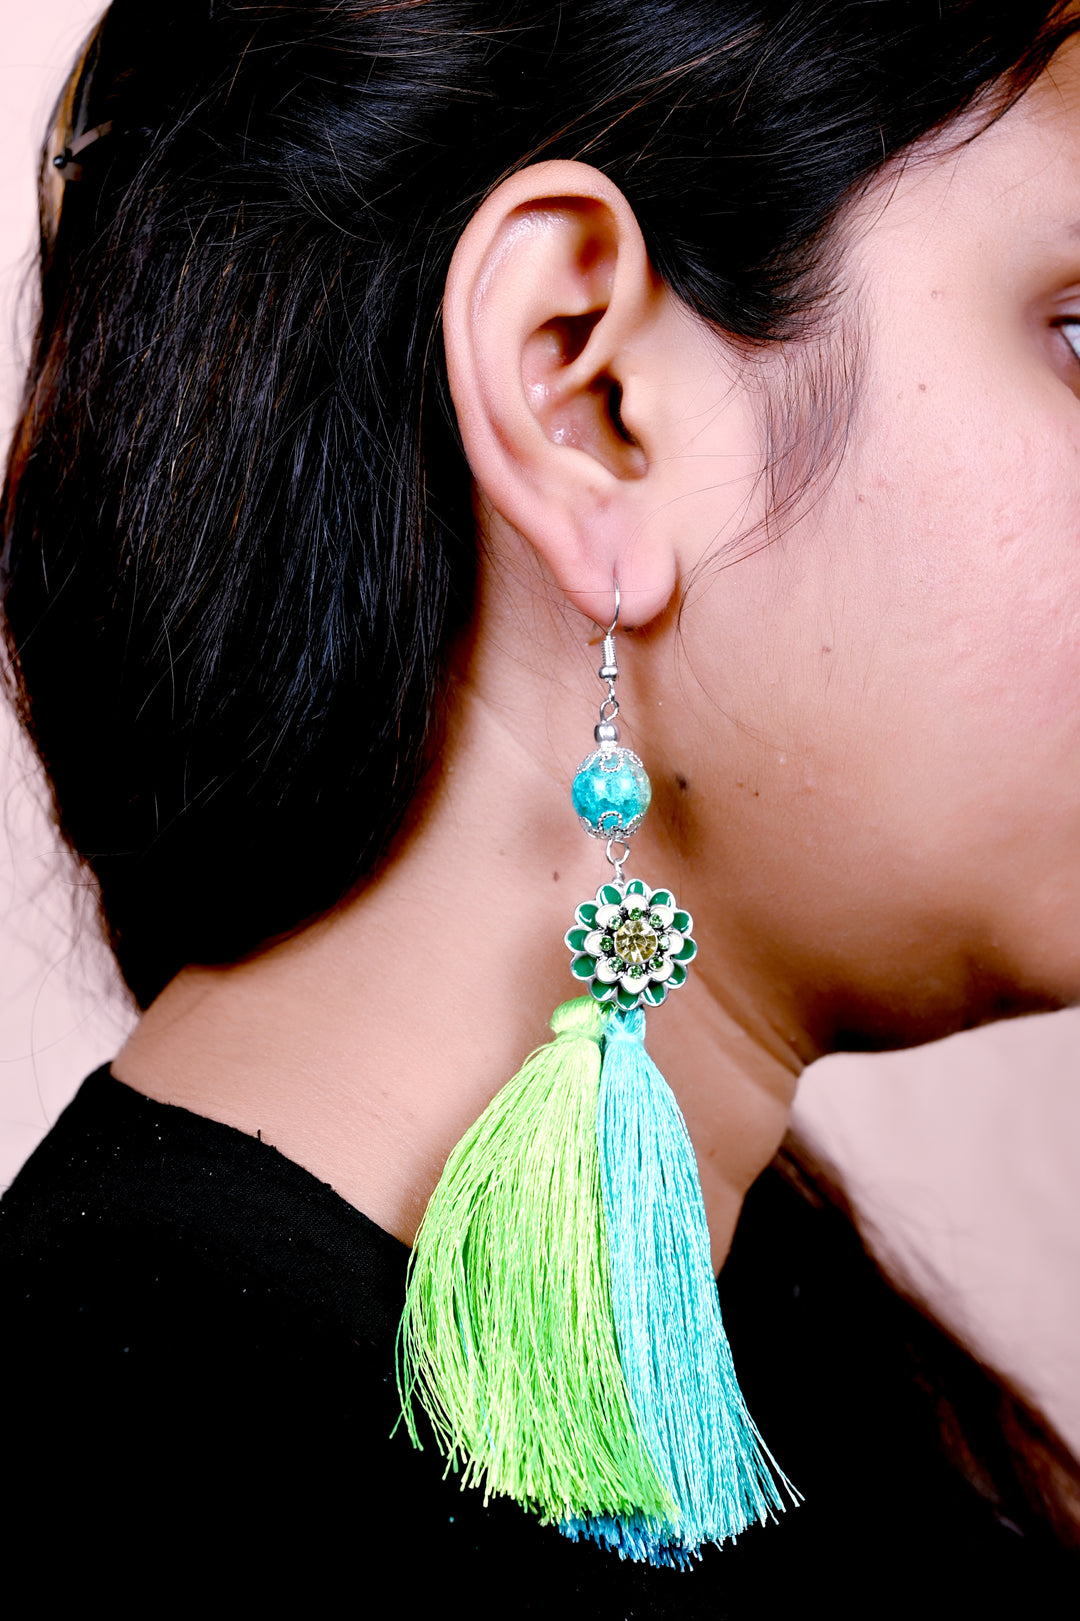 Green & Turquoise Tassel Earring Styled With Flower Shaped Metal Charm & Glass Crackle Bead